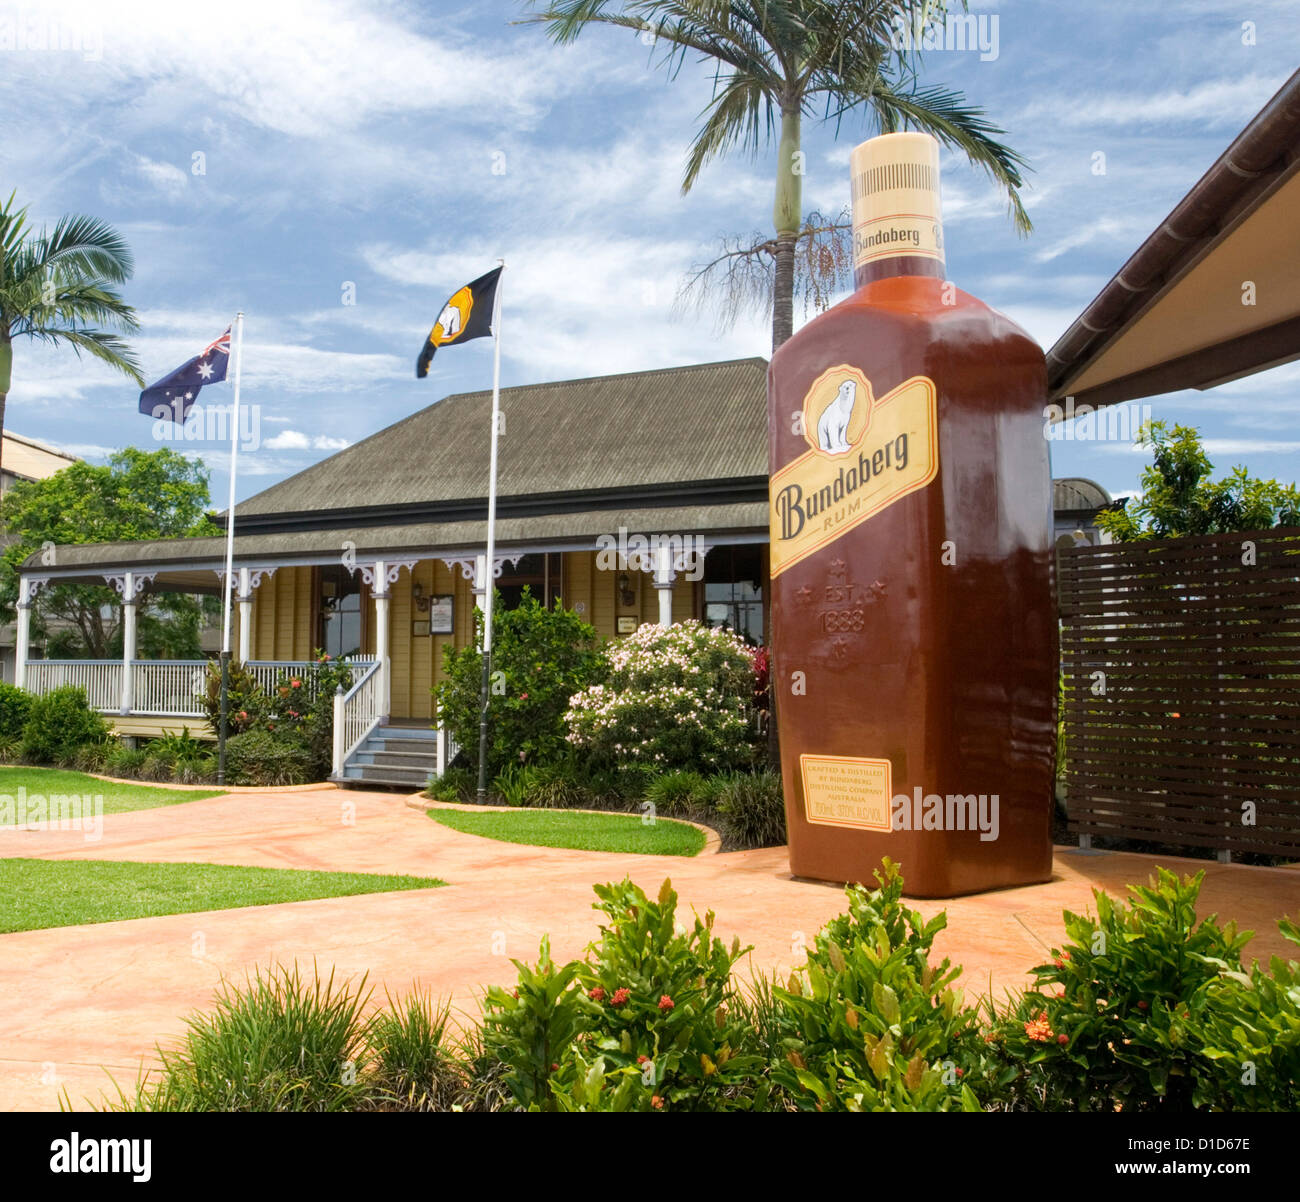 Entrance to Bundaberg rum distillery / bond store tourist attraction with old cottage and gigantic bottle of rum Stock Photo